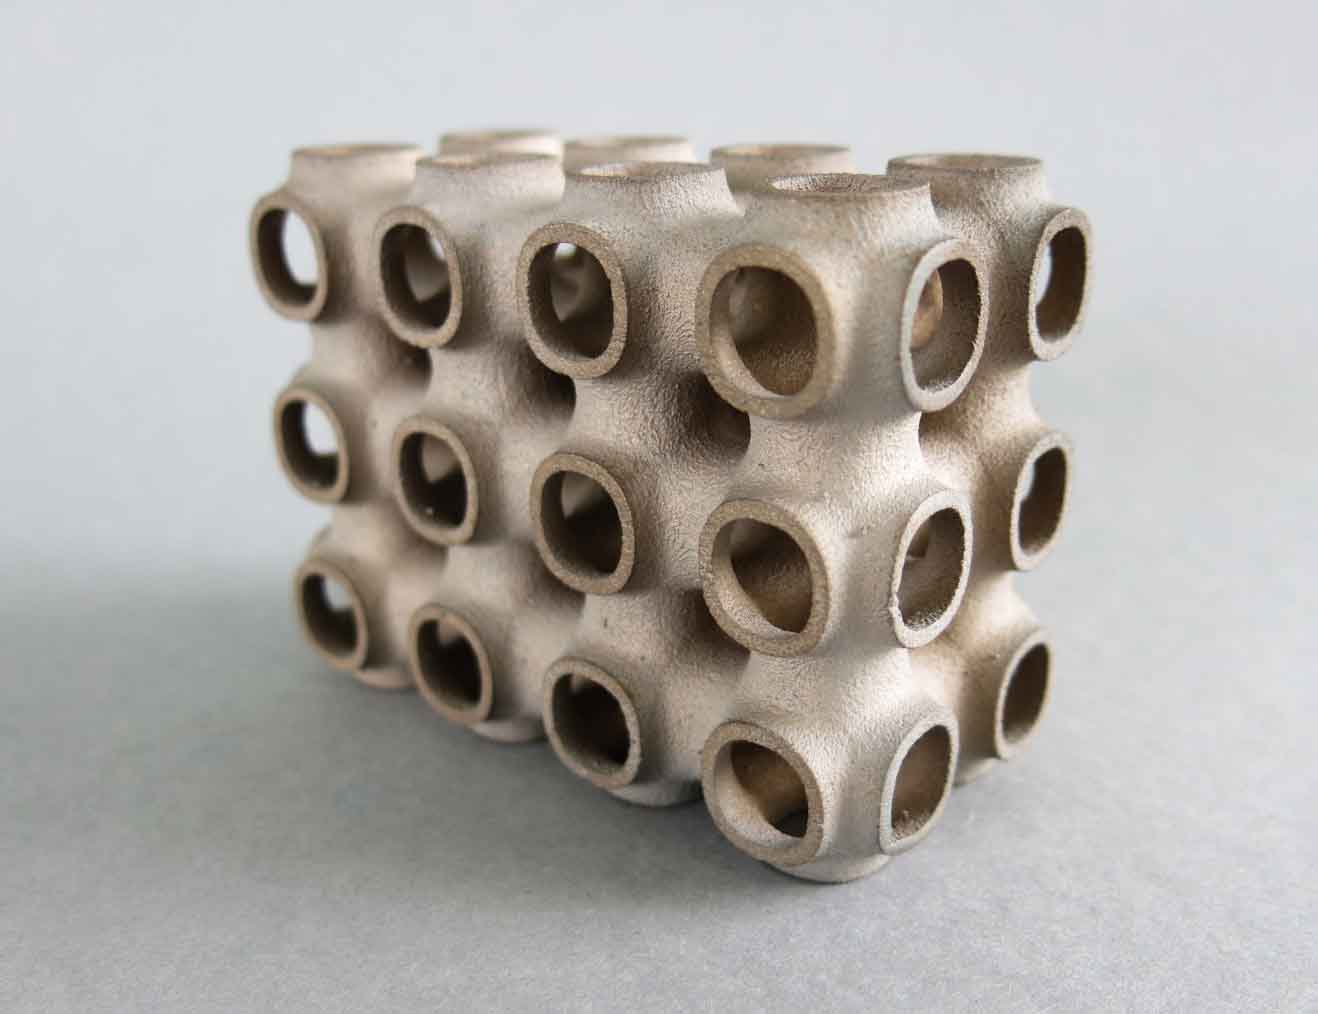 New Material Available: Binder Jetting Stainless Steel for 3D Printing